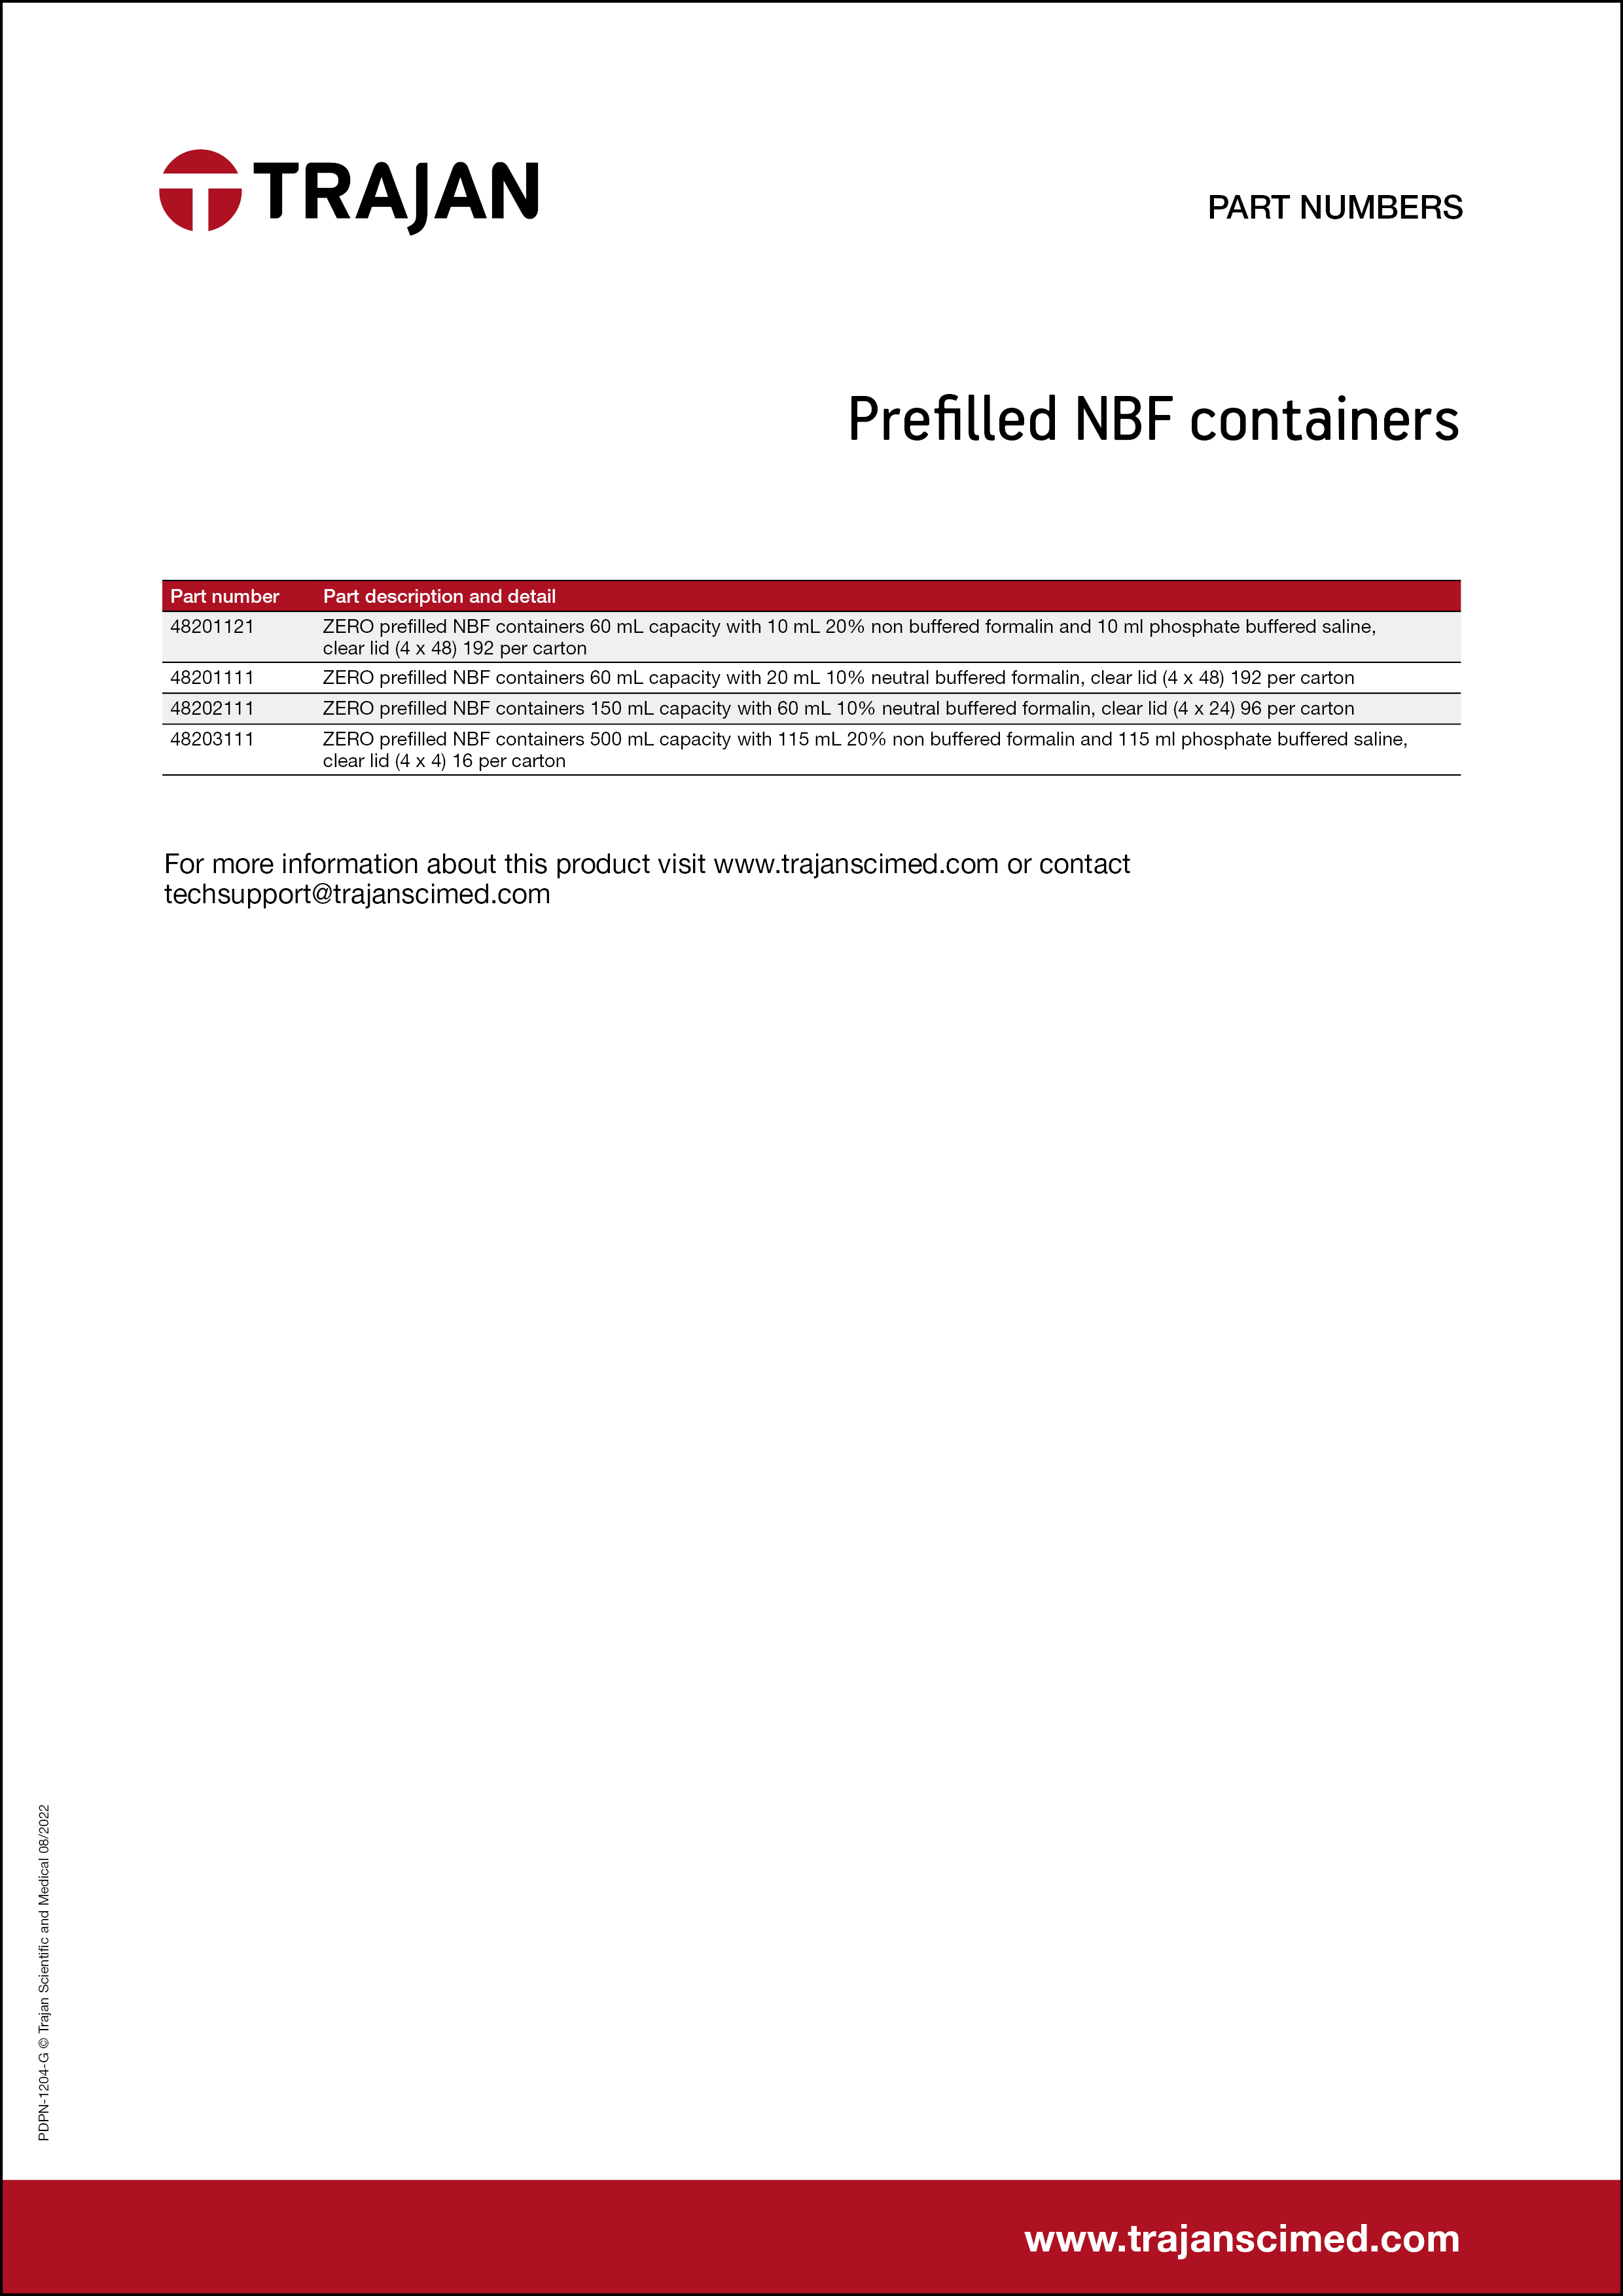 Part Number List - Prefilled NBF containers